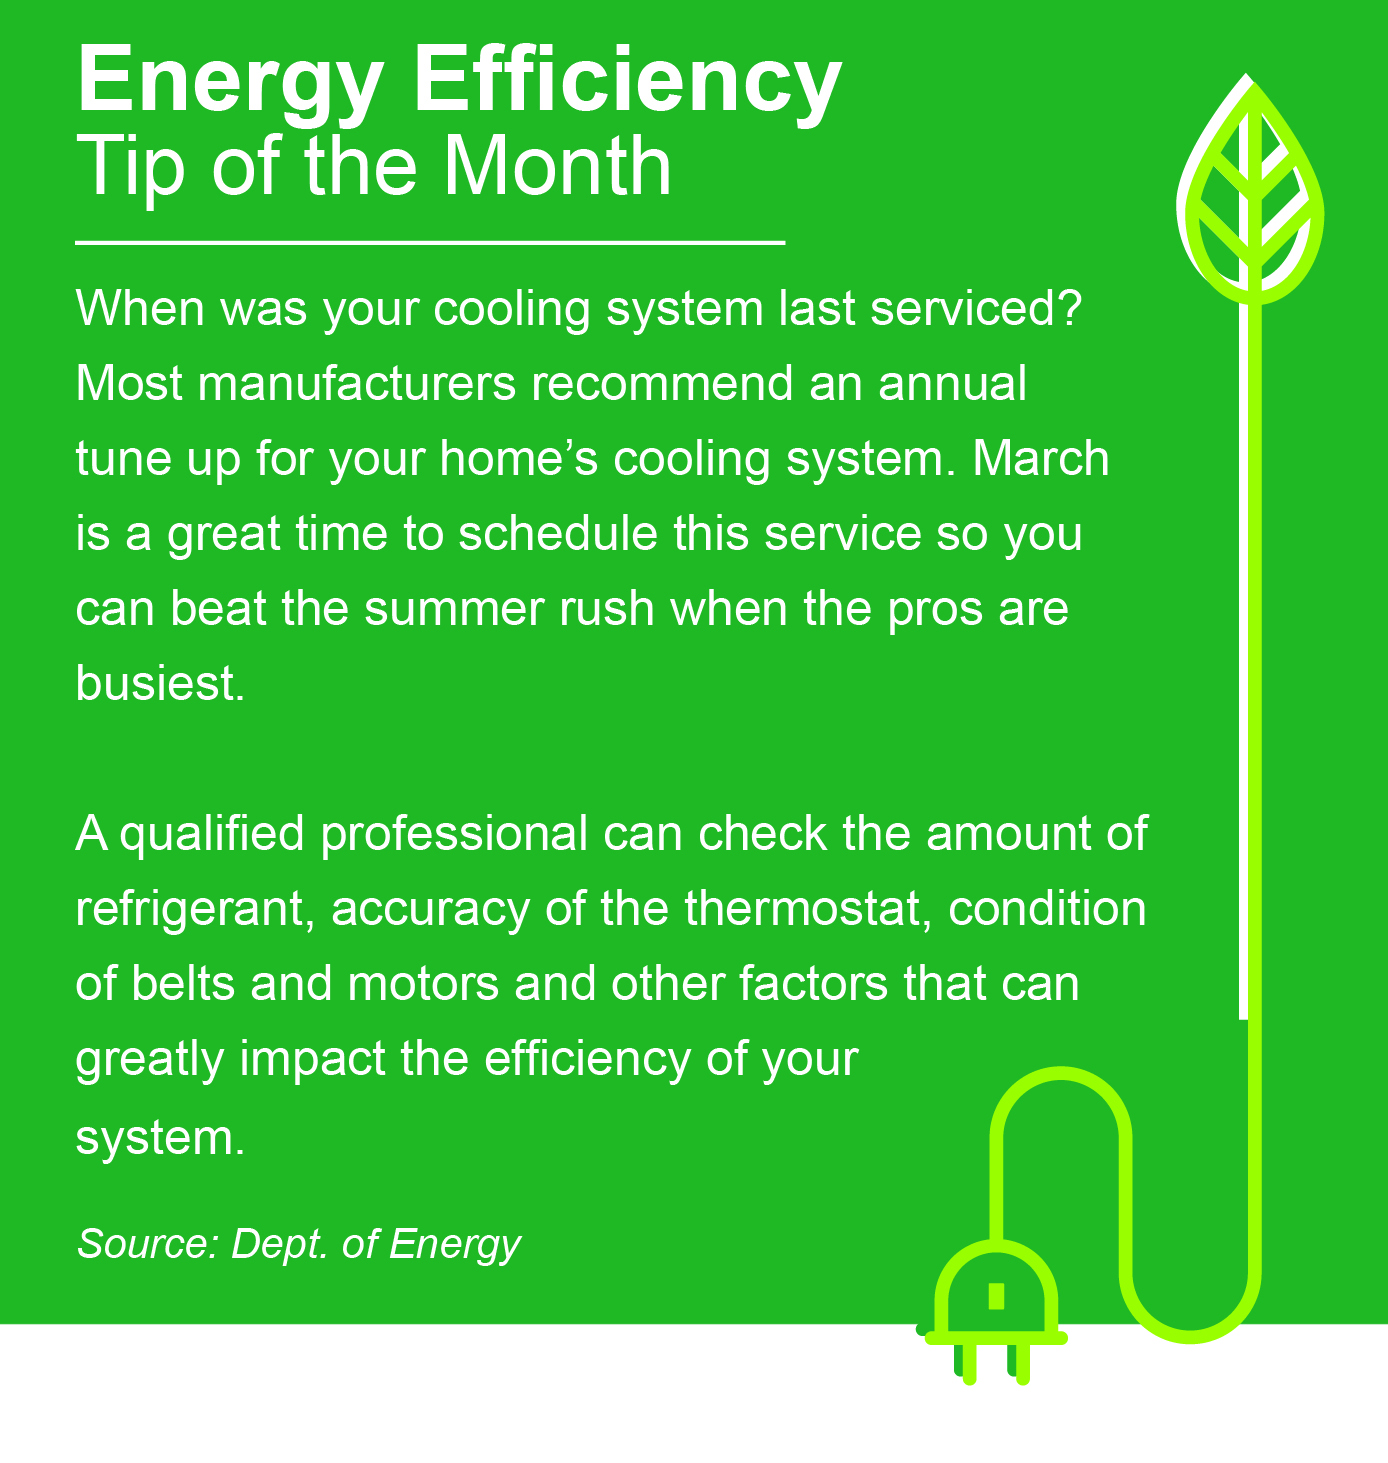 Energy Efficiency Tip of the Month: When was your cooling system last serviced? Most manufacturers recommend an annual tune up for your home's cooling system. March is a great time to schedule this service so you can beat the summer rush when the pros are busiest. A qualified professional can check the amount of refrigerant, accuracy of the thermostat, condition of belts and motors, and other factors that can greatly impact the efficiency of your system. Source: Department of Energy